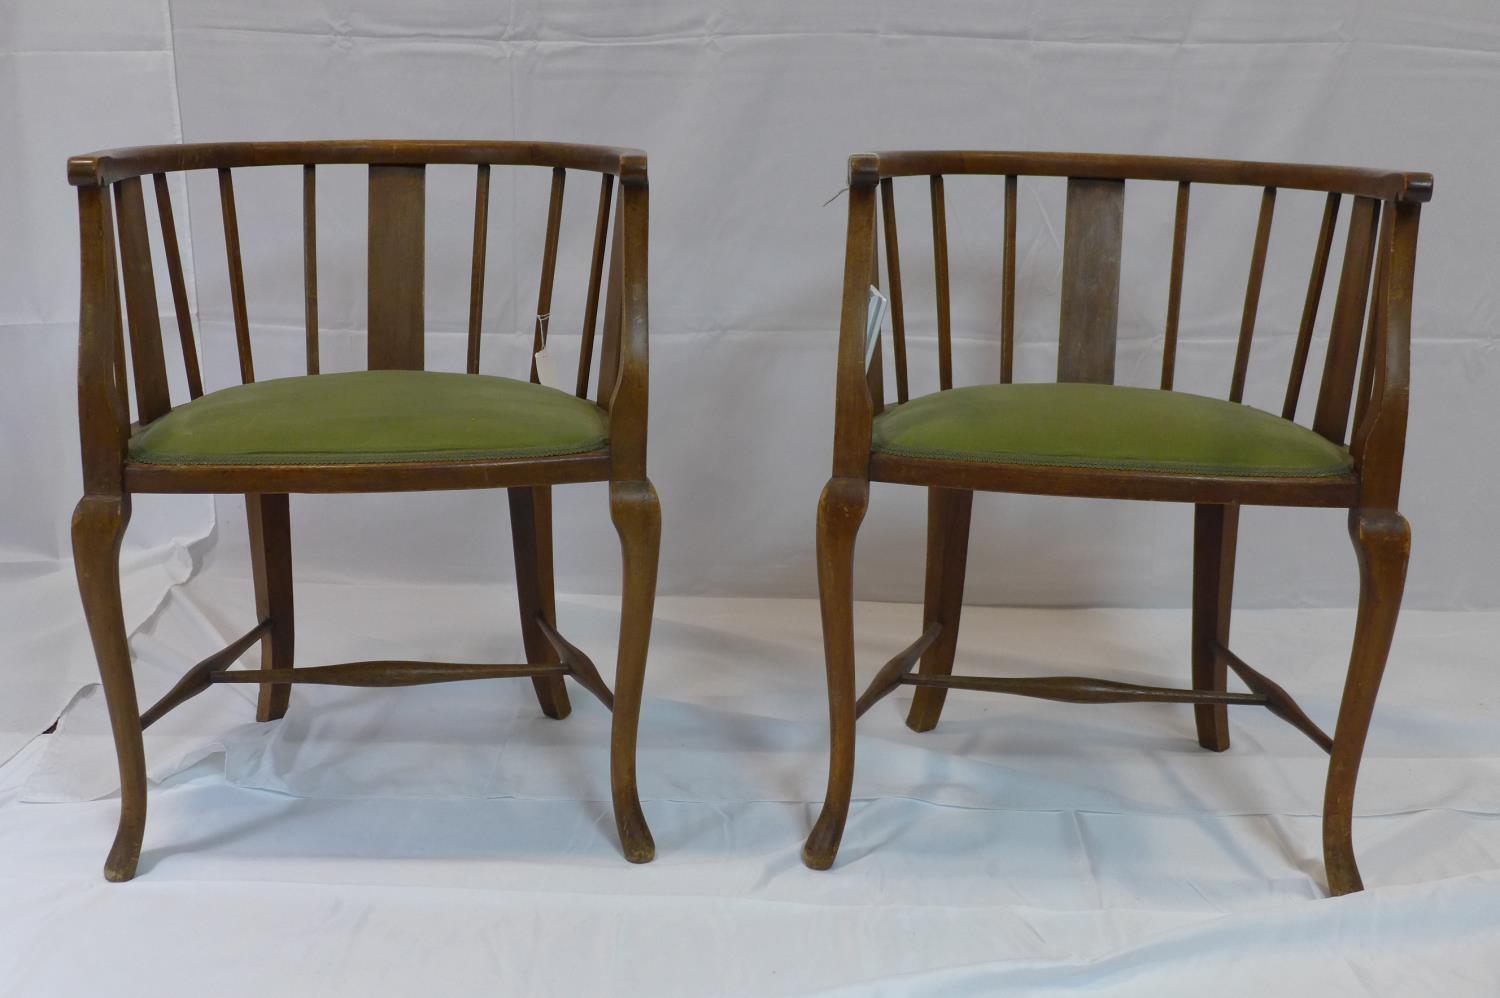 A pair of Edwardian mahogany tub chairs with velour seats